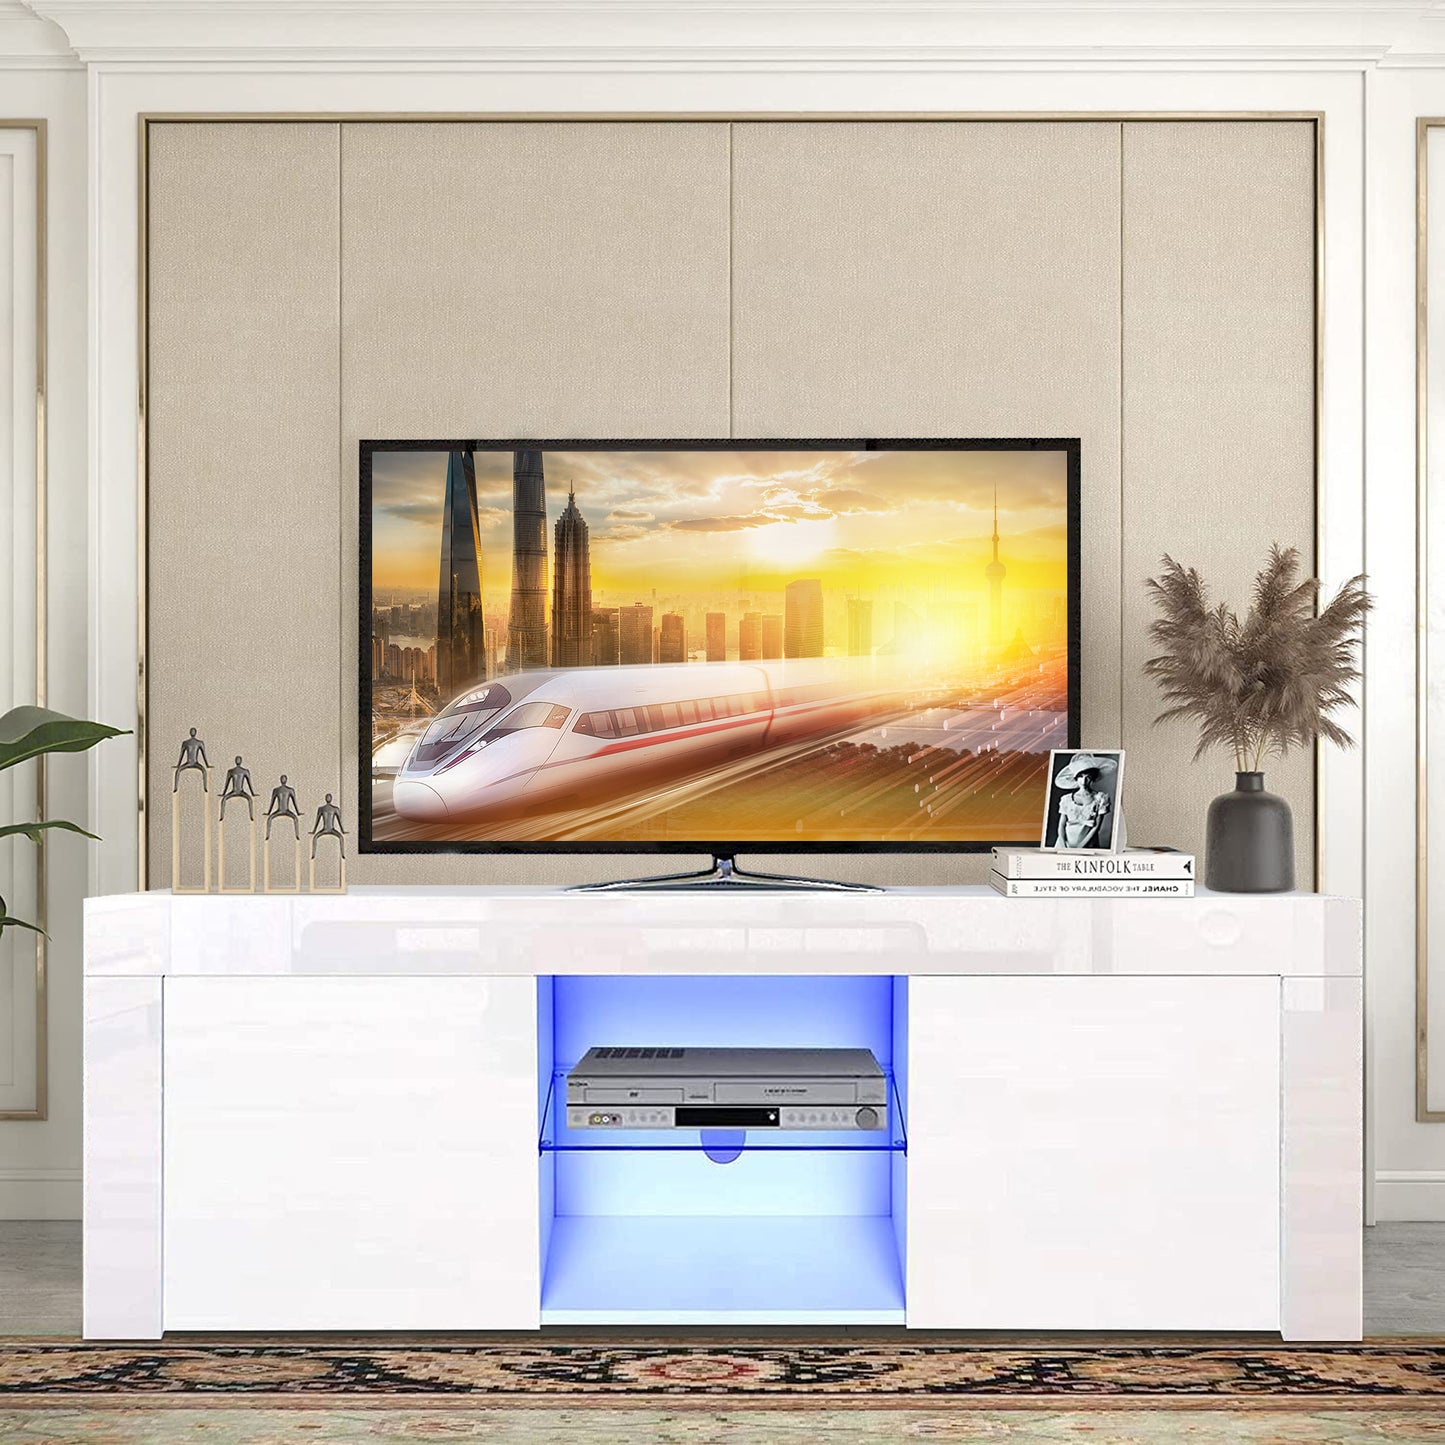 Modern LED TV Stand for 65 Inch TVs with Color Change Lighting, White TV Stand Universal Entertainment Center for Video Gaming, Movies, and Home Decor, Clear Glass Shelving, 59"L×14" W×18"H